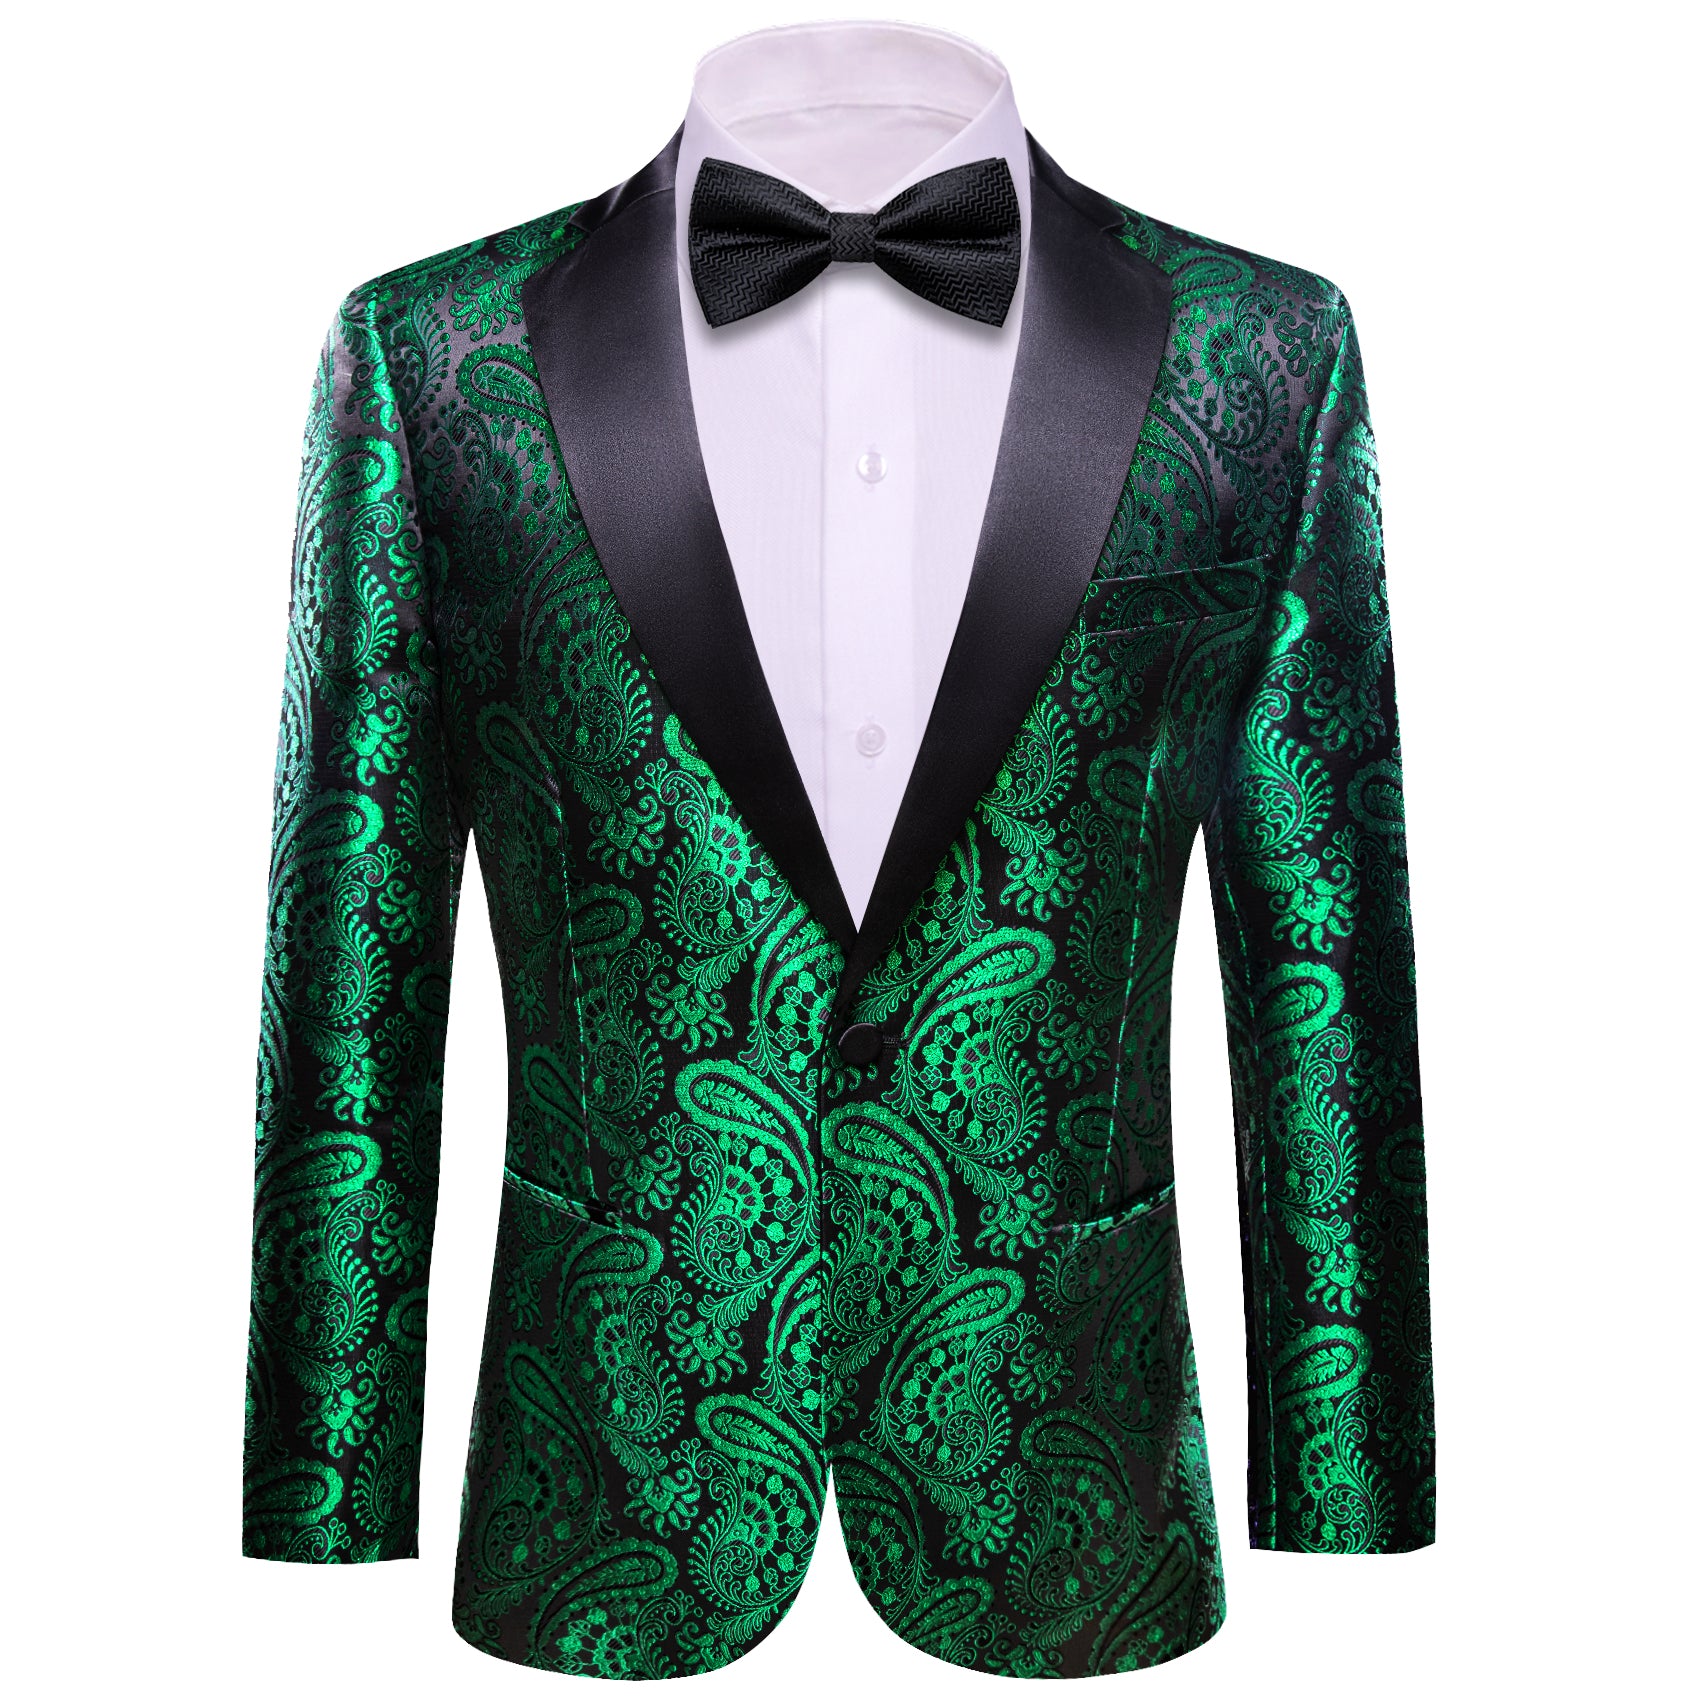 Barry.wang Men's Suit Green Gold Paisley Notched Collar Suit Jacket